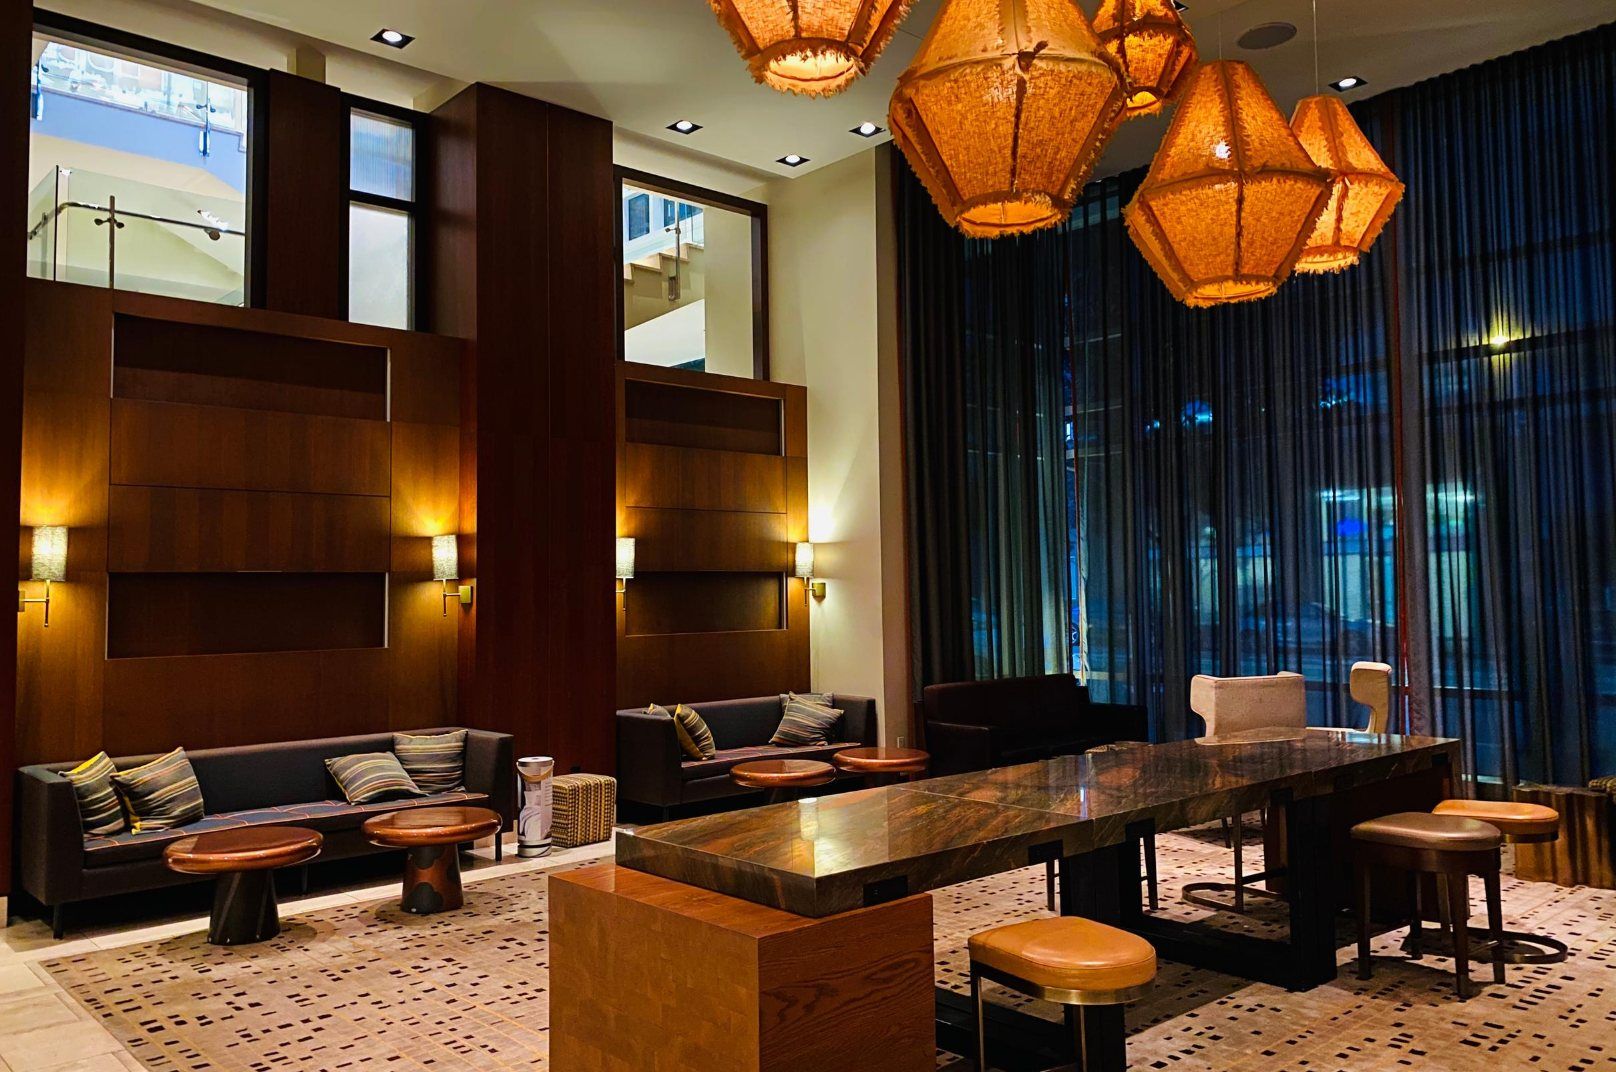 Staying at The InterContinental: the best hotel in San Francisco